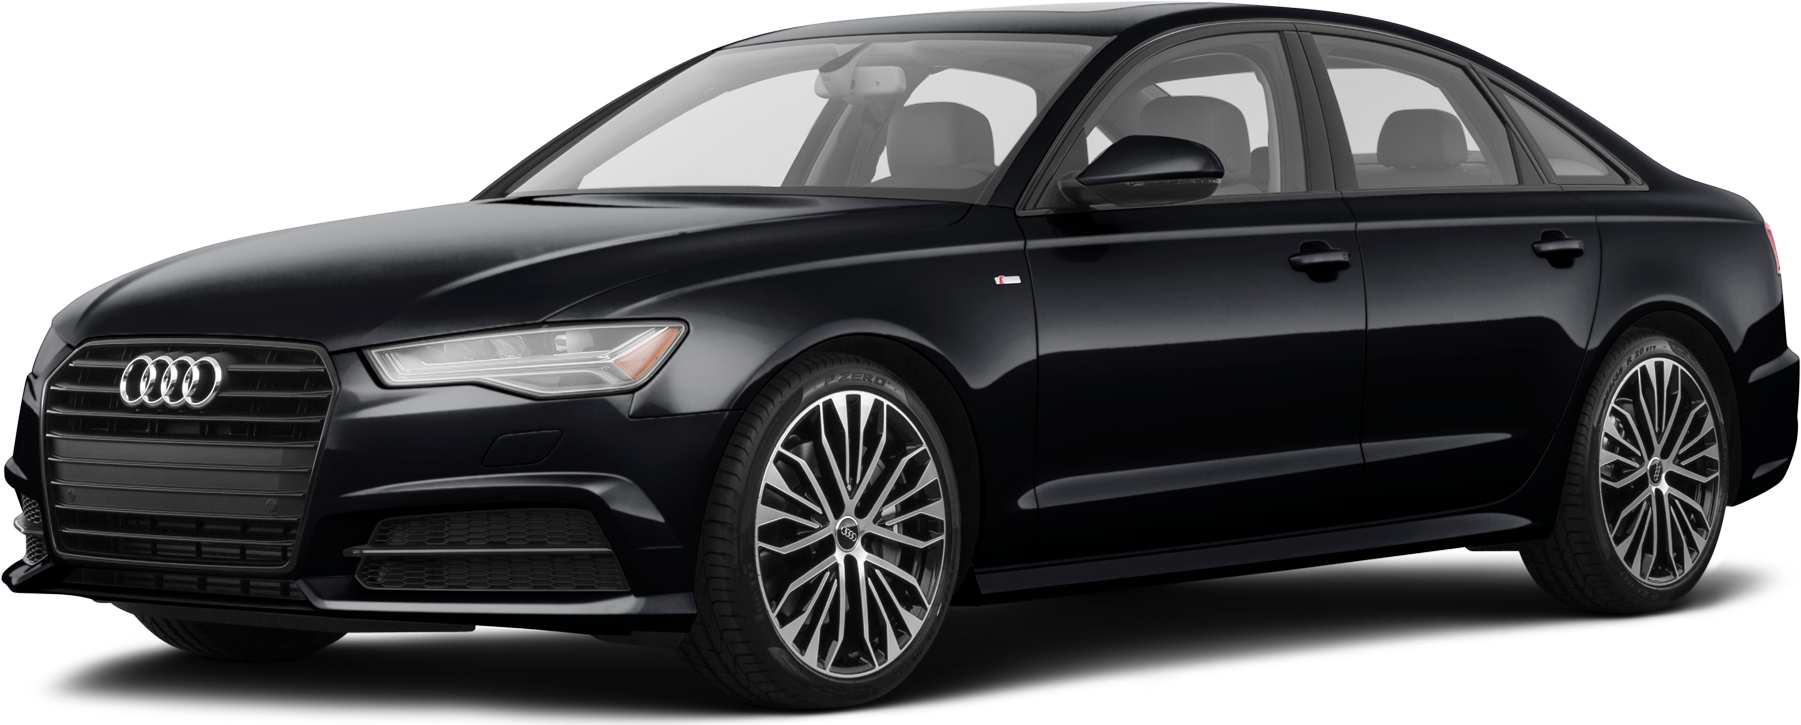 2018 Audi A6 Buyers Guide  Kelley Blue Book